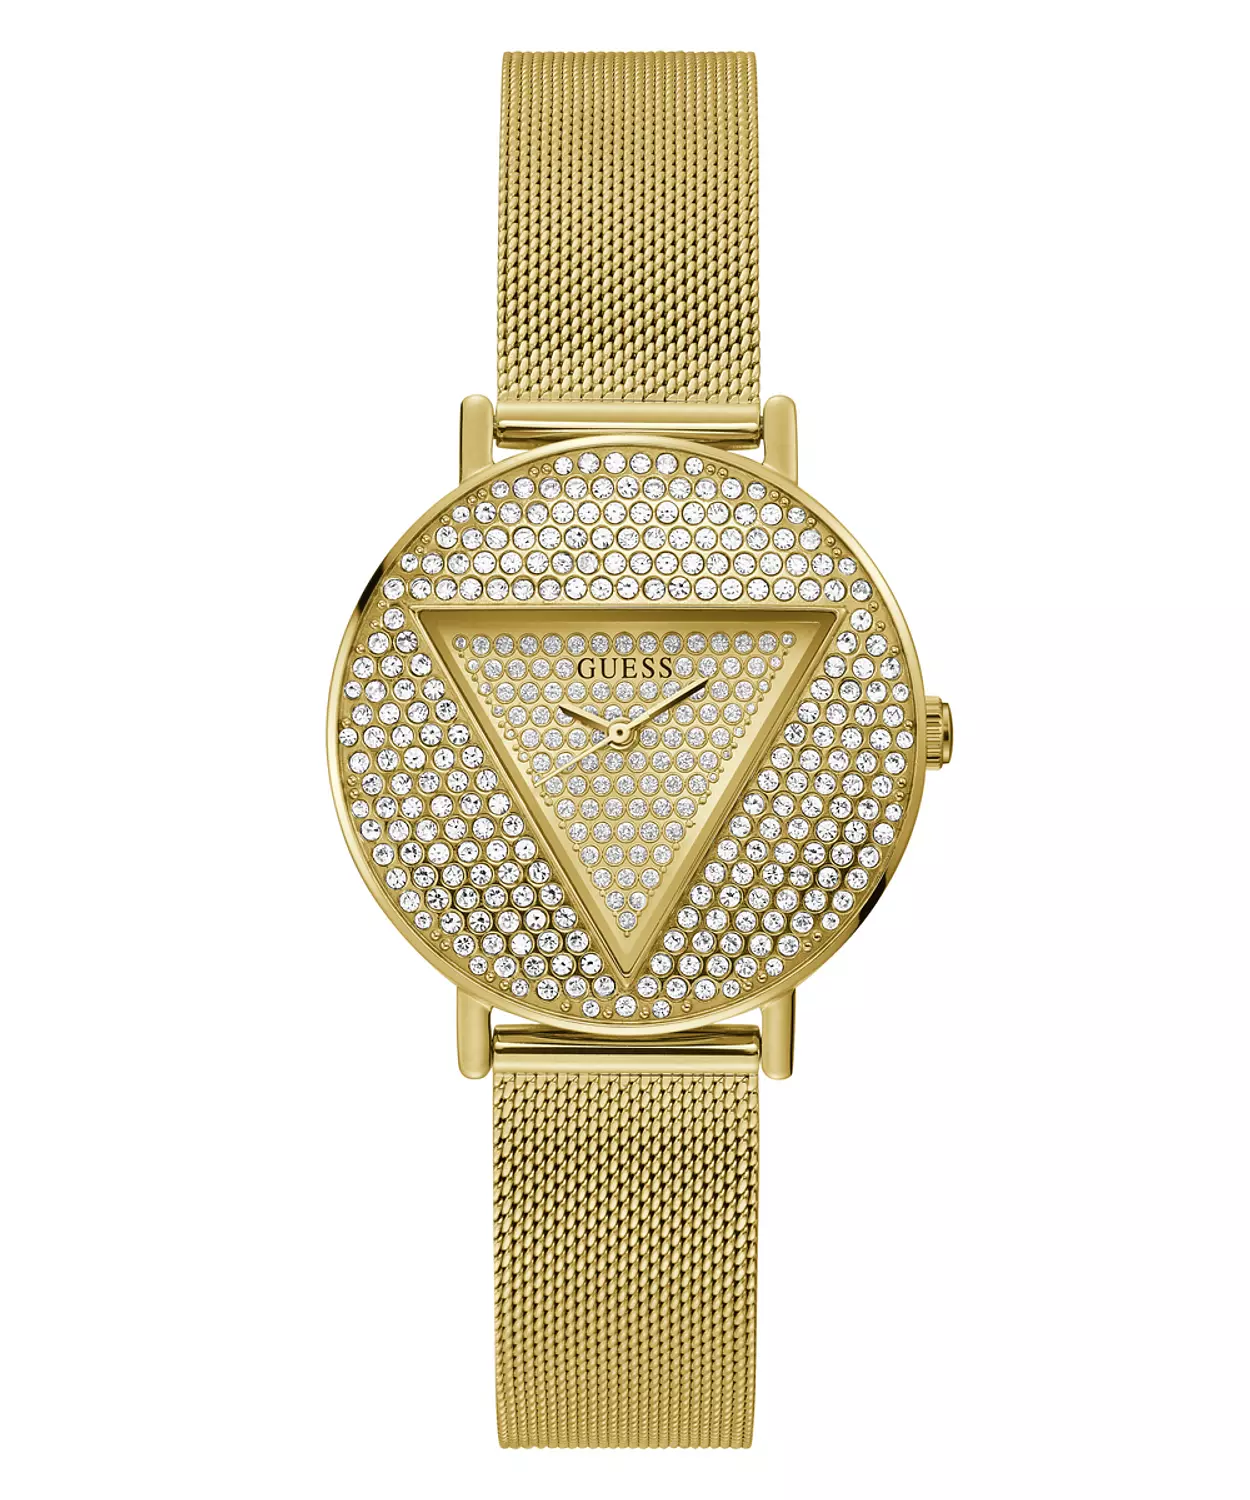 GUESS GW0477L2 ANALOG WATCH  For Women Gold Stainless Steel/Mesh Polished Bracelet  hover image